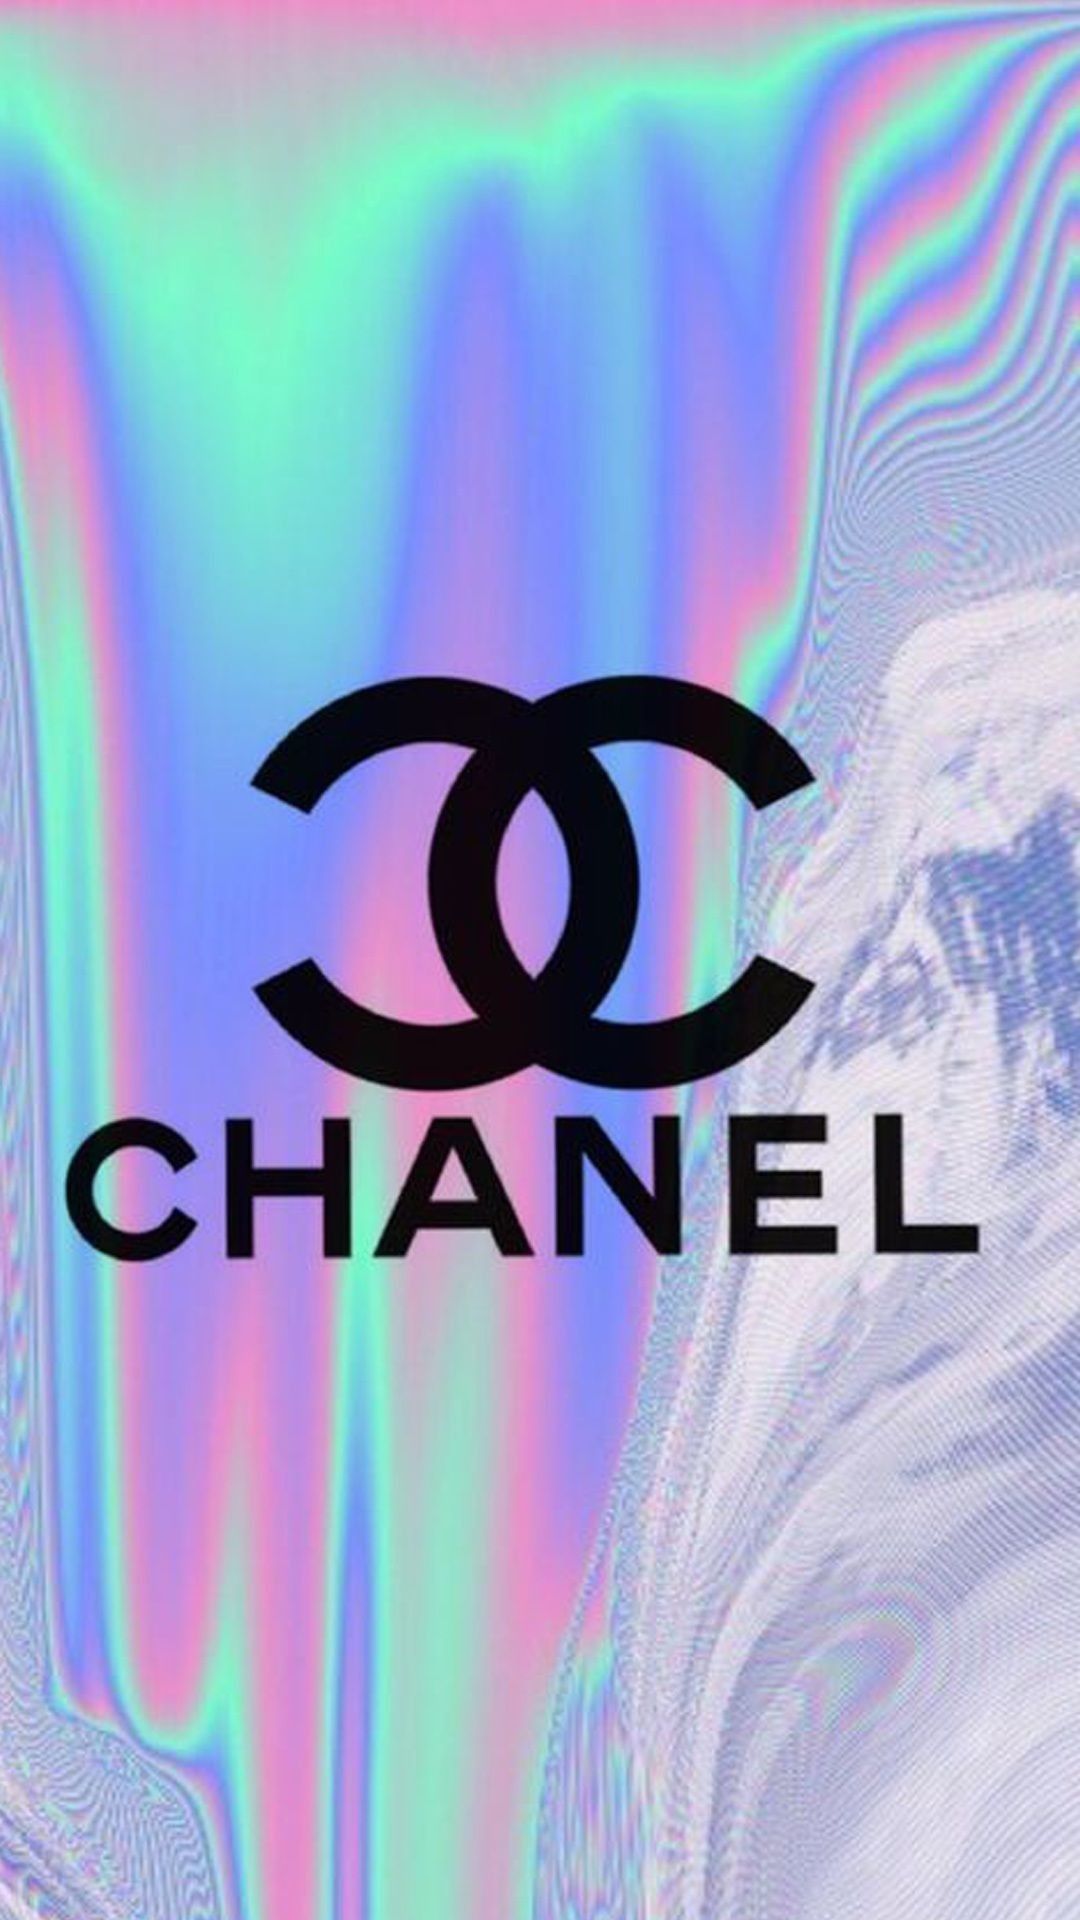 Chanel Tumblr Wallpaper, iPhone Background Wallpaper, Cute